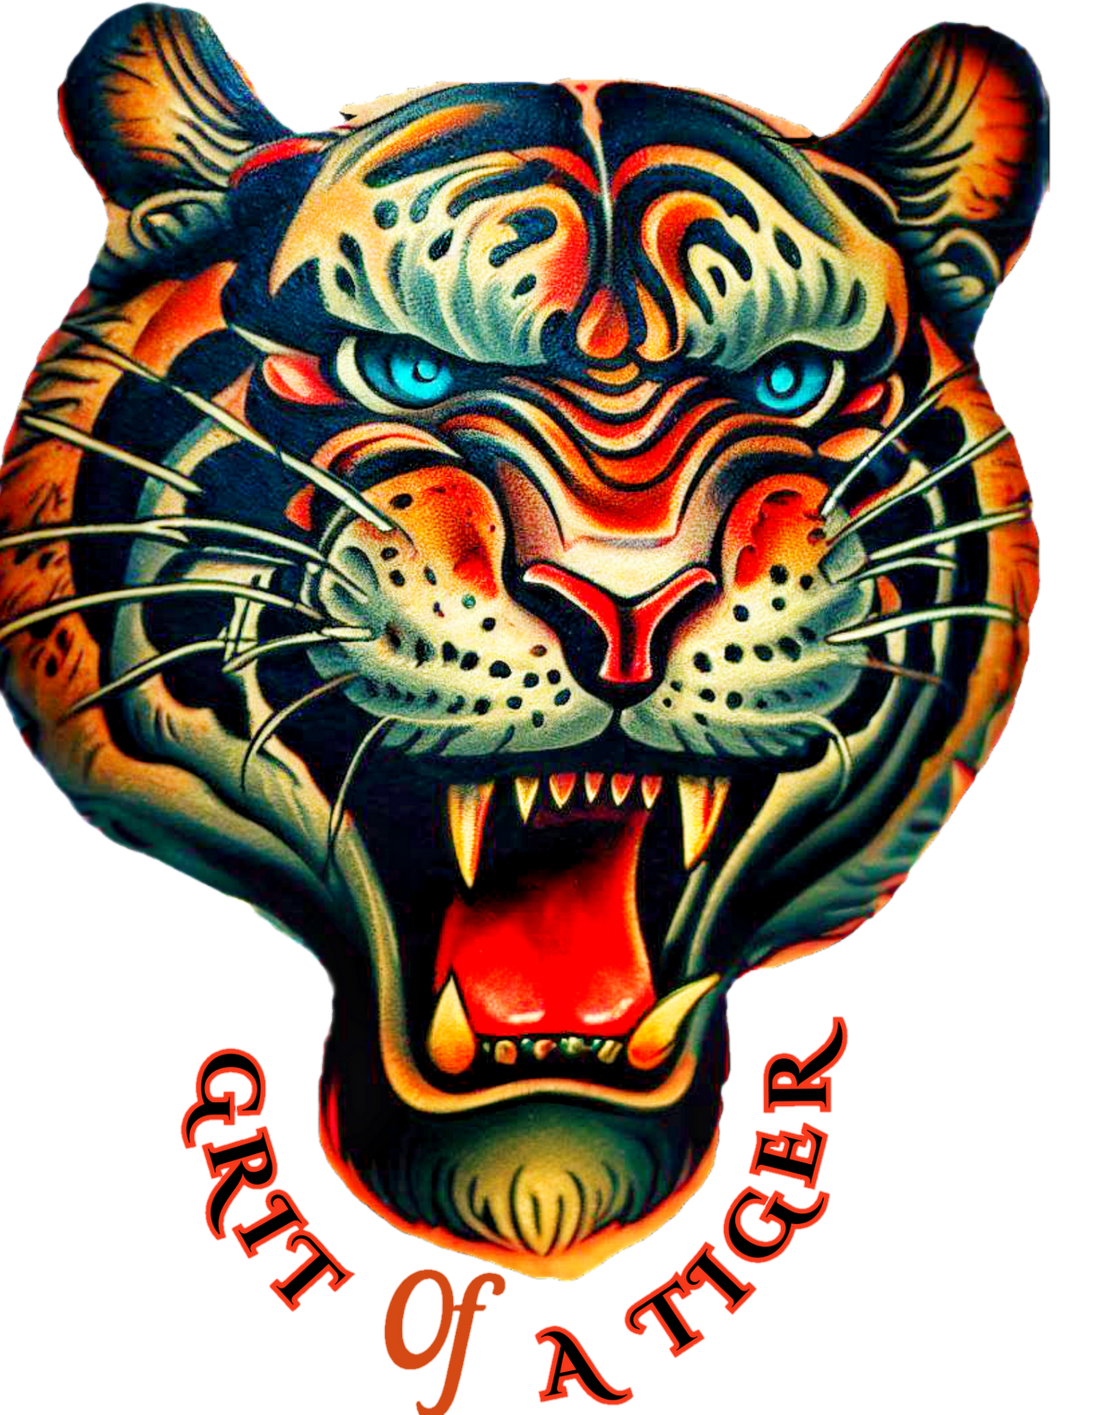 Grit of a tiger graphic for GROW YOUR GRIT apparel.  